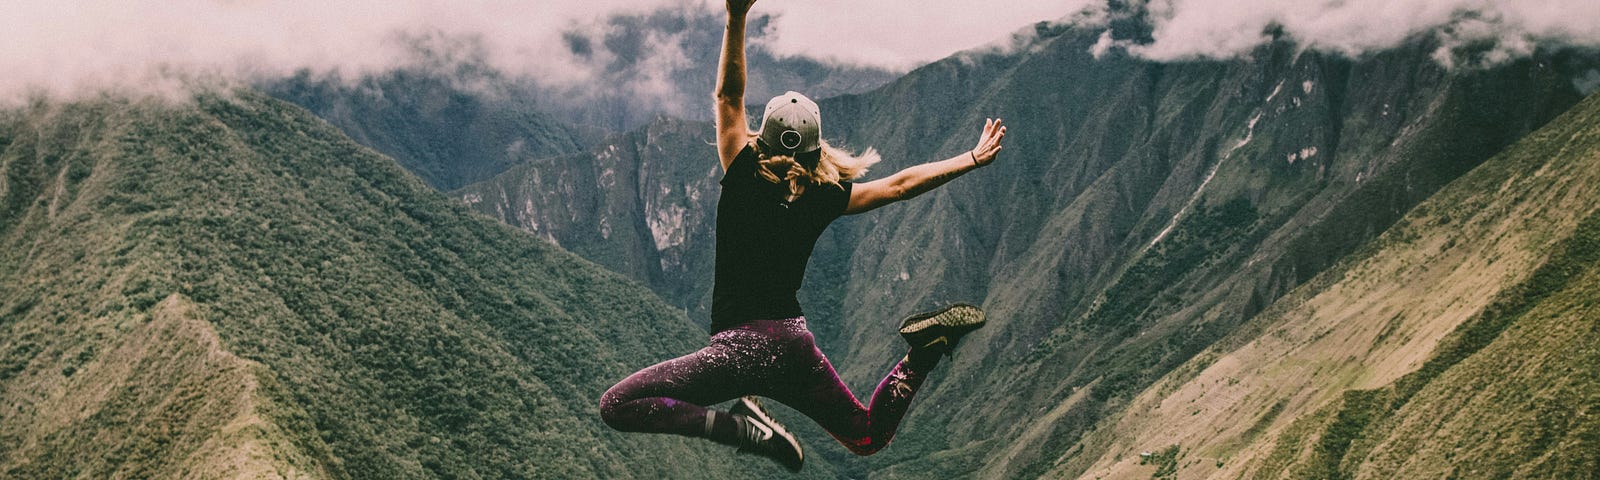 A woman jumping up in the air with mountains and a river in the background